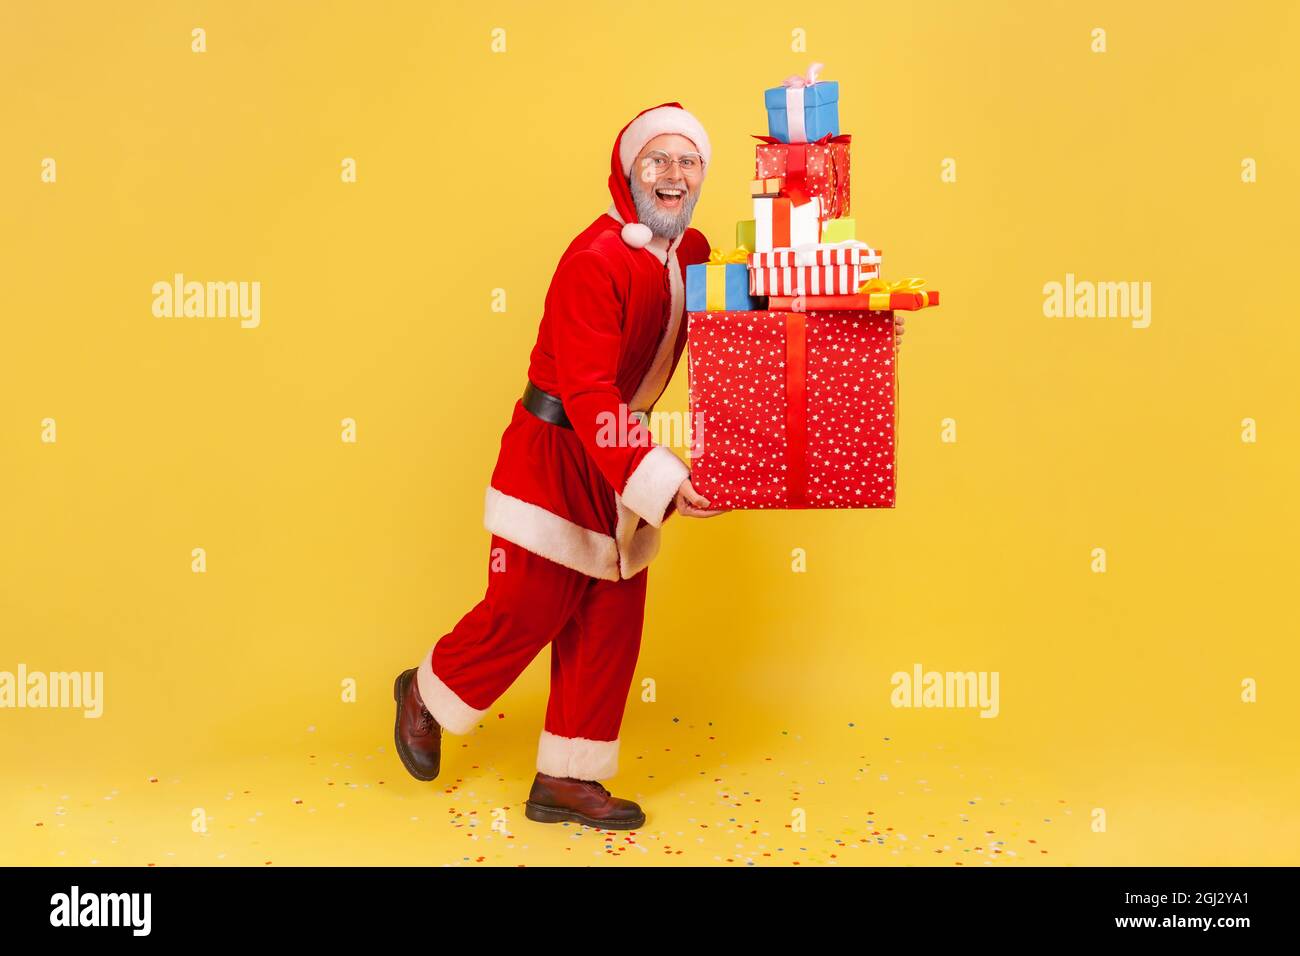 Full length portrait of elderly man with gray beard in santa claus costume holding stack of Christmas present boxes, celebrating Christmas holiday. In Stock Photo